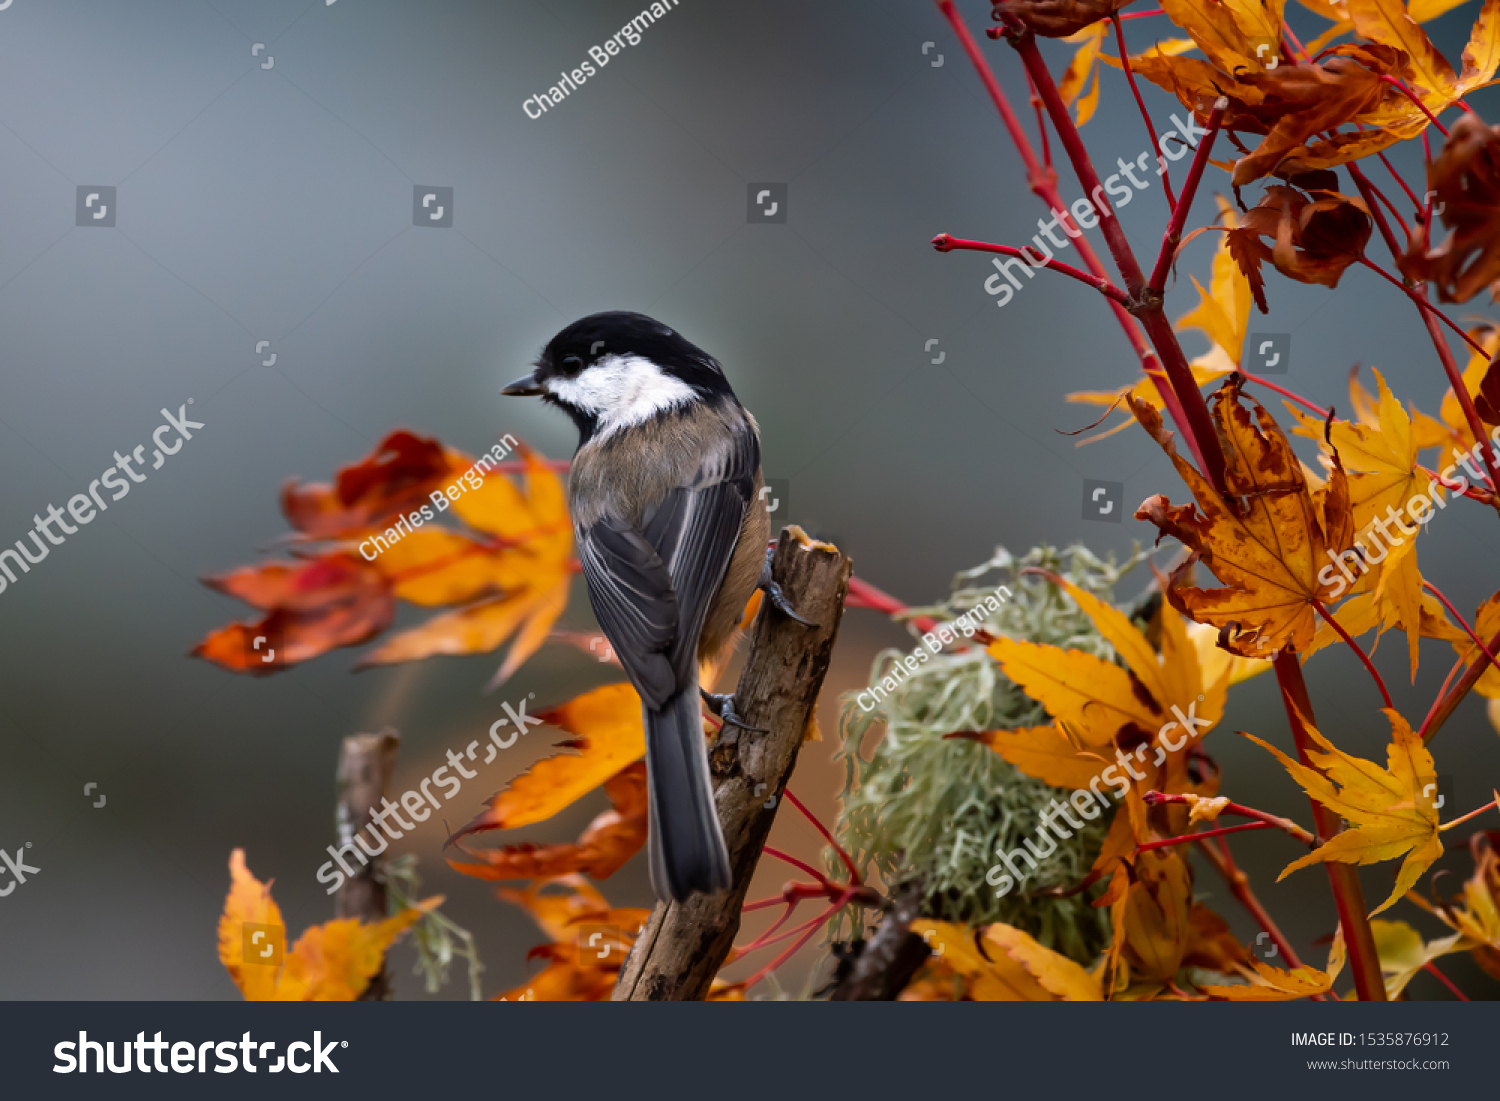 A Chestnut-backed Chickadee announces the arrival of autumn amid colorful maple leaves.  Chestnut-backed chickadees are small, beautifully colored with chocolate brown, and a delight in the back yard. #1535876912